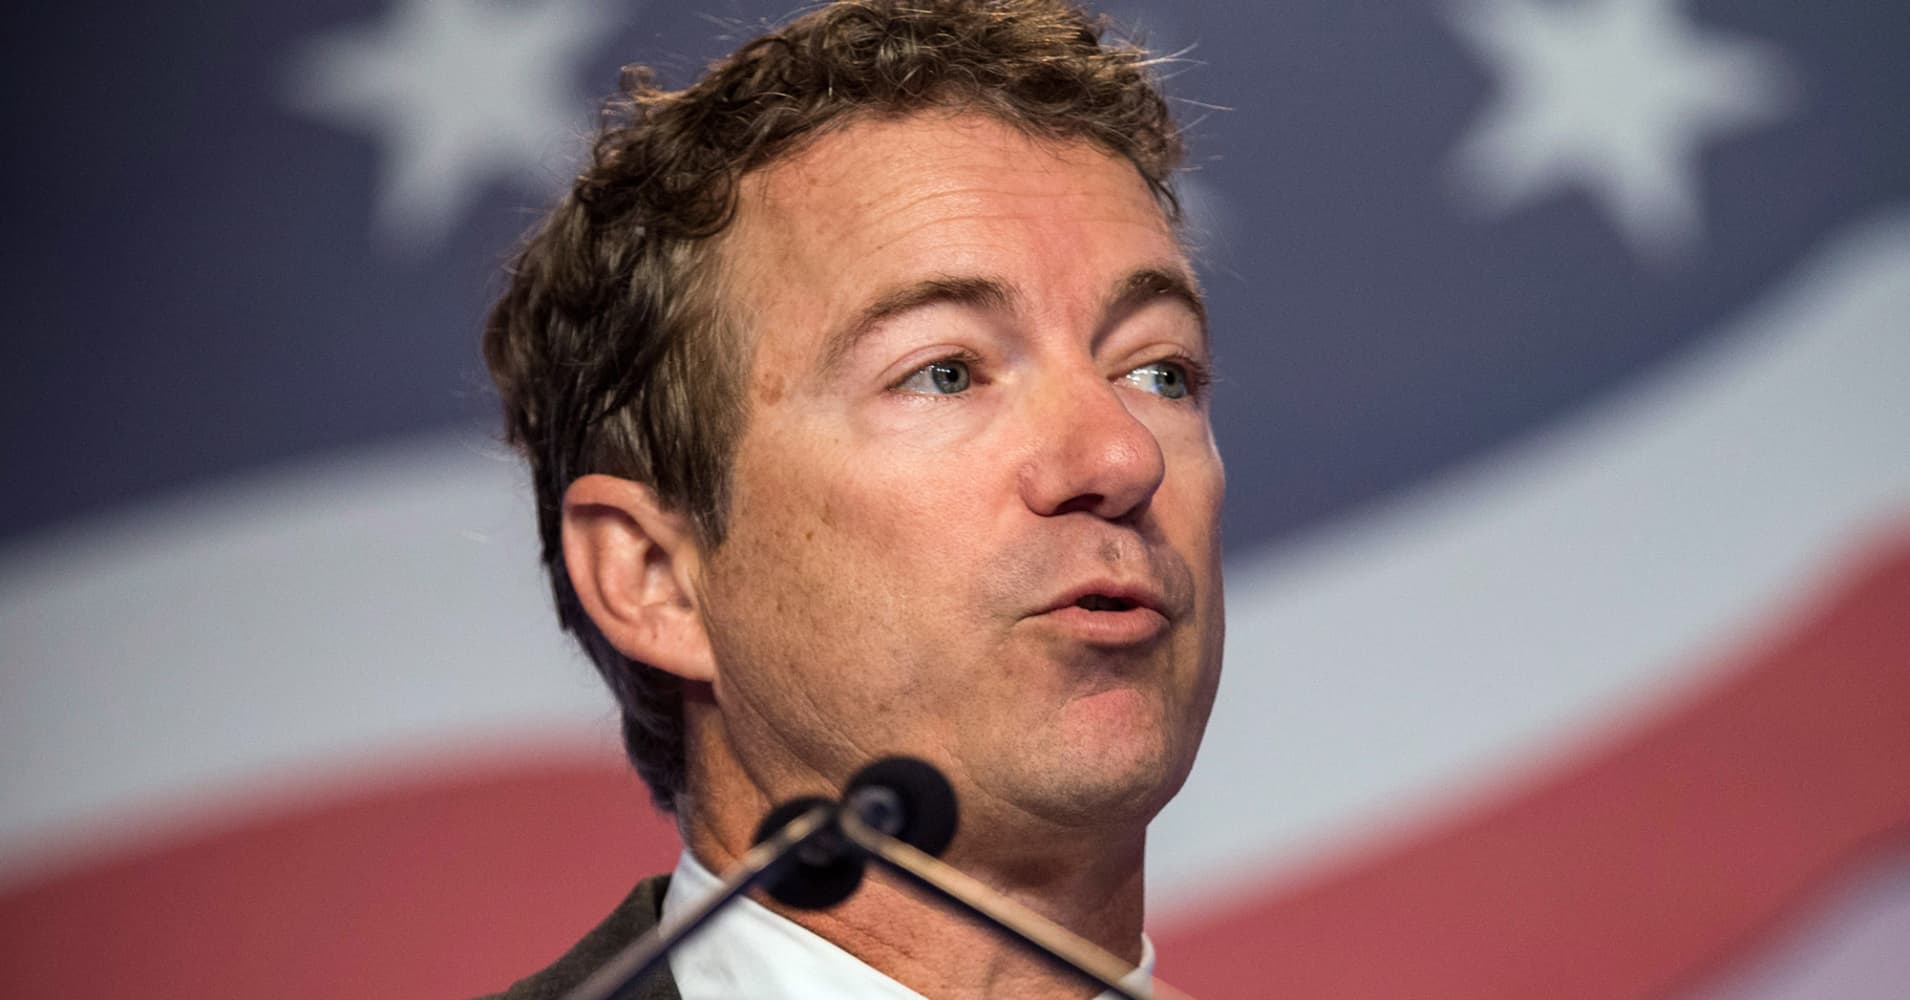 GOP presidential candidate Rand Paul suspends campaign: Report1910 x 1000